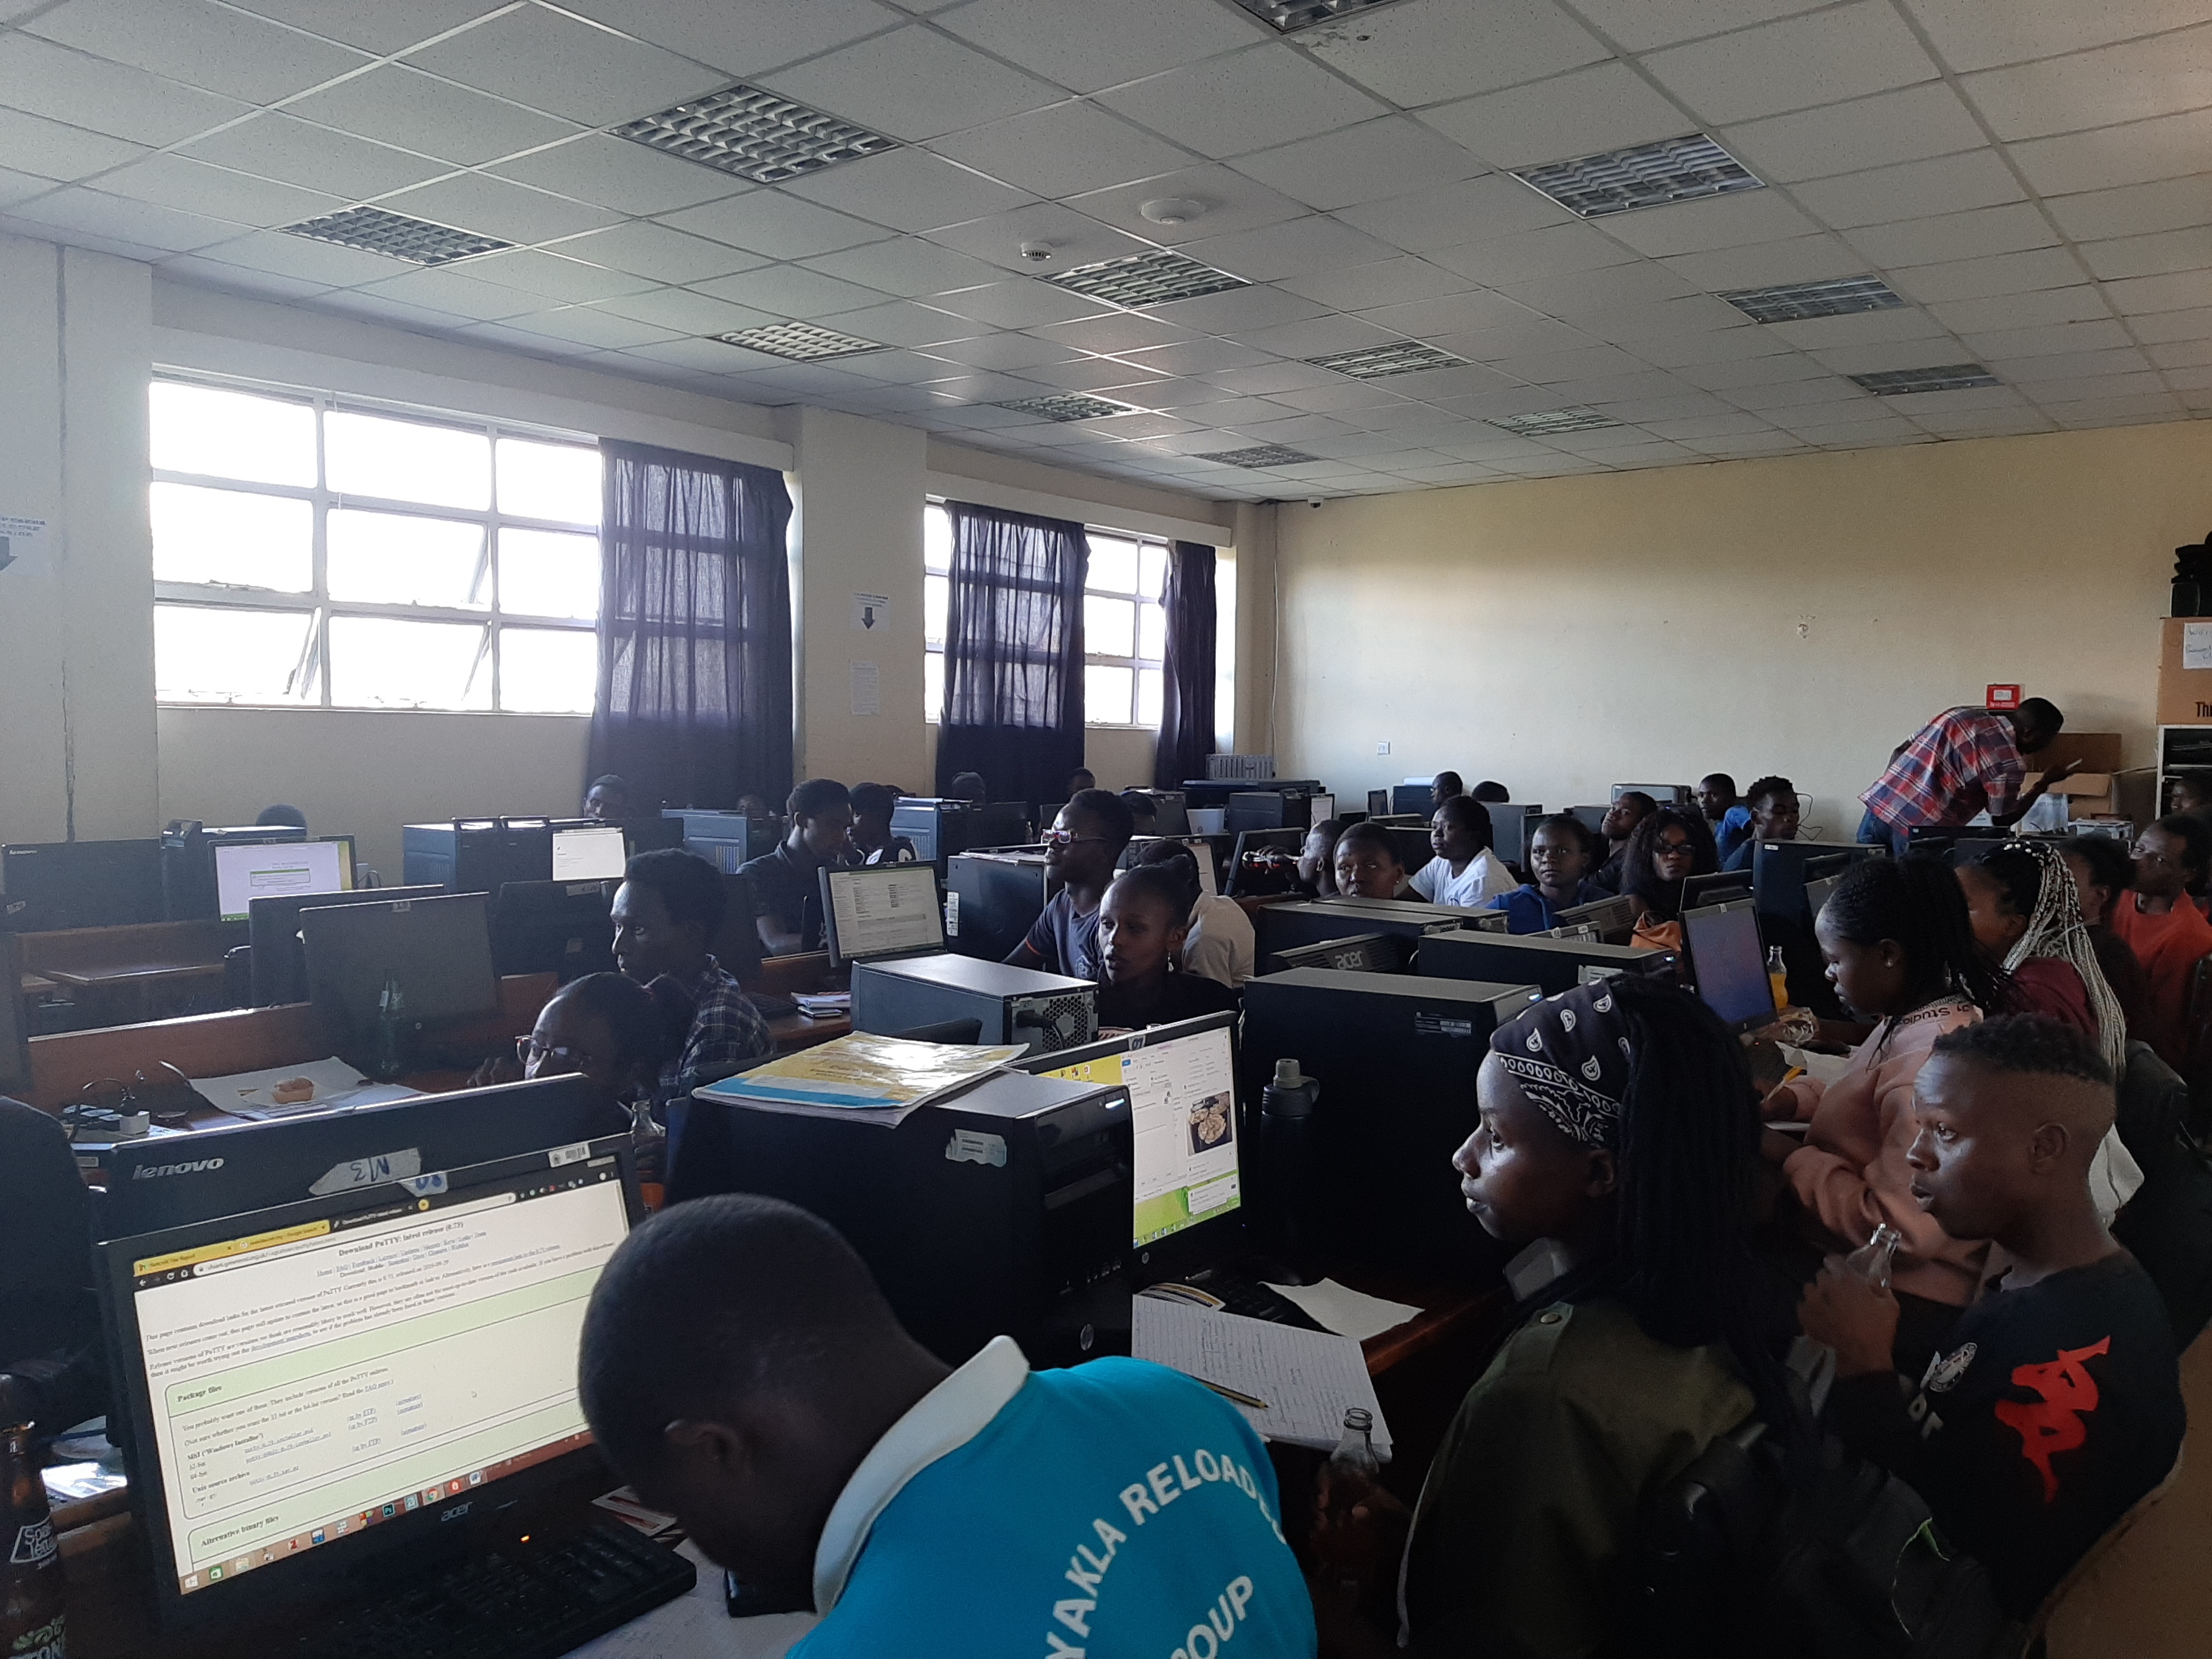 LINUX LEARNING CENTRE LTD CONDUCTING LPIC 1 LINUX SYSTEM ADMINISTRATION TRAINING AT COOPERATIVE UNIVERSITY OF KENYA (CUK)  IN NOVEMBER 2019